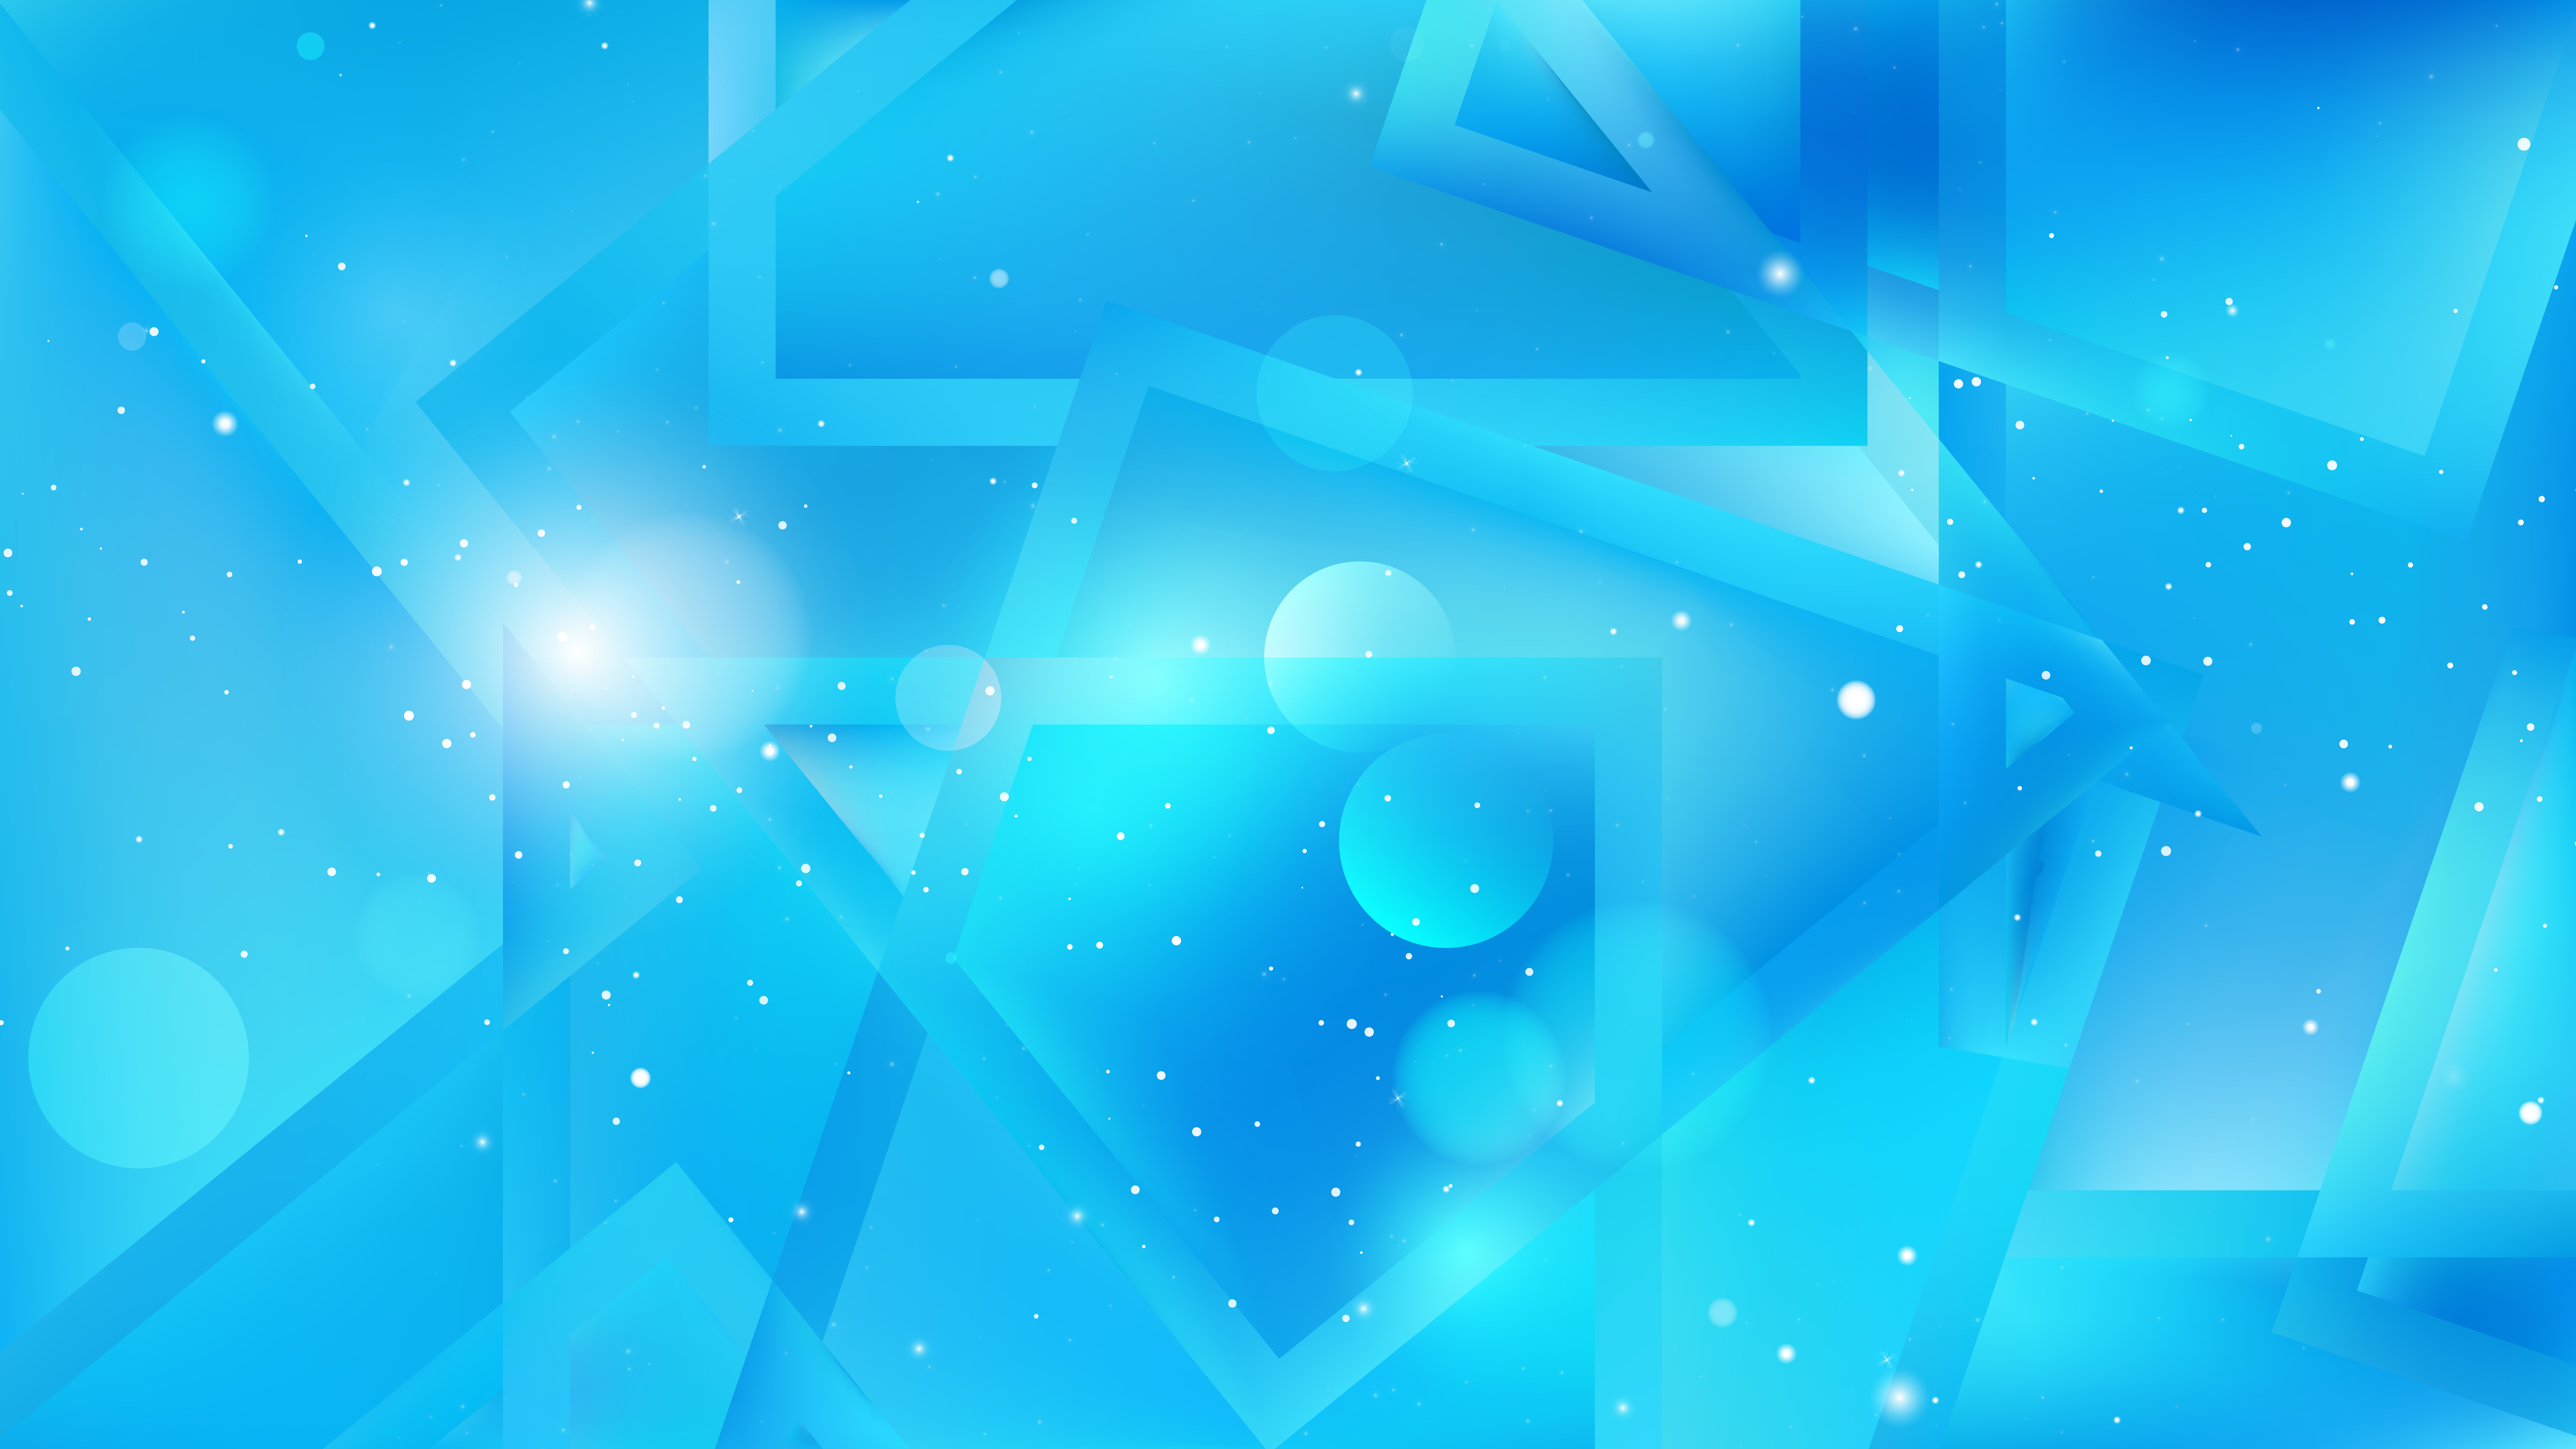 Download high-quality Blue design background For your projects